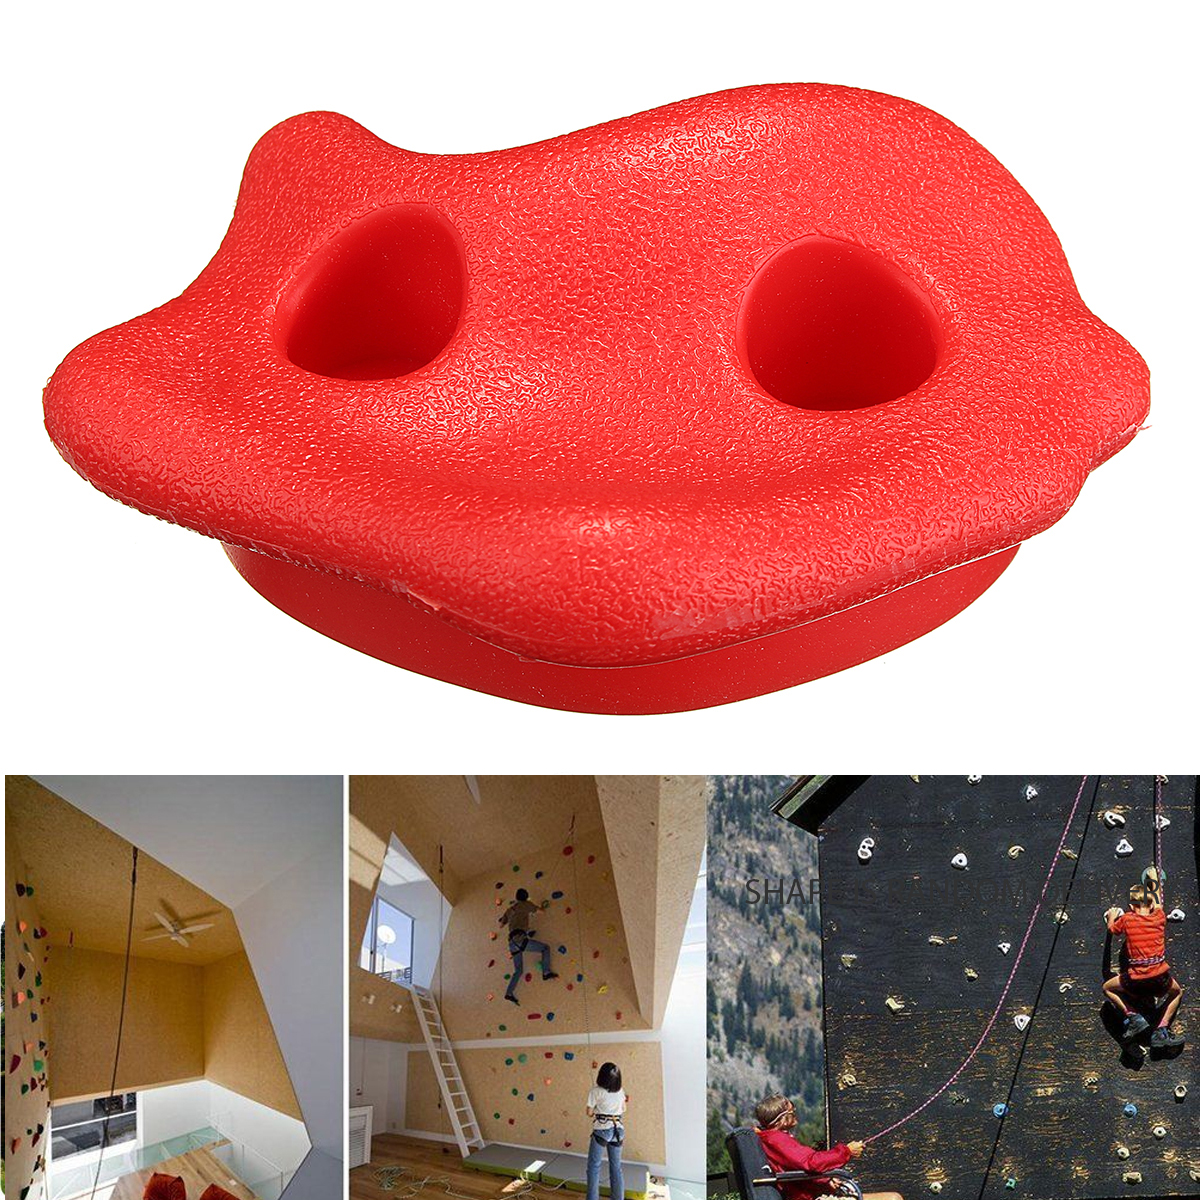 Textured Climbing Holds Rock Wall Stones Holds Grip For Kids Indoor Outdoor